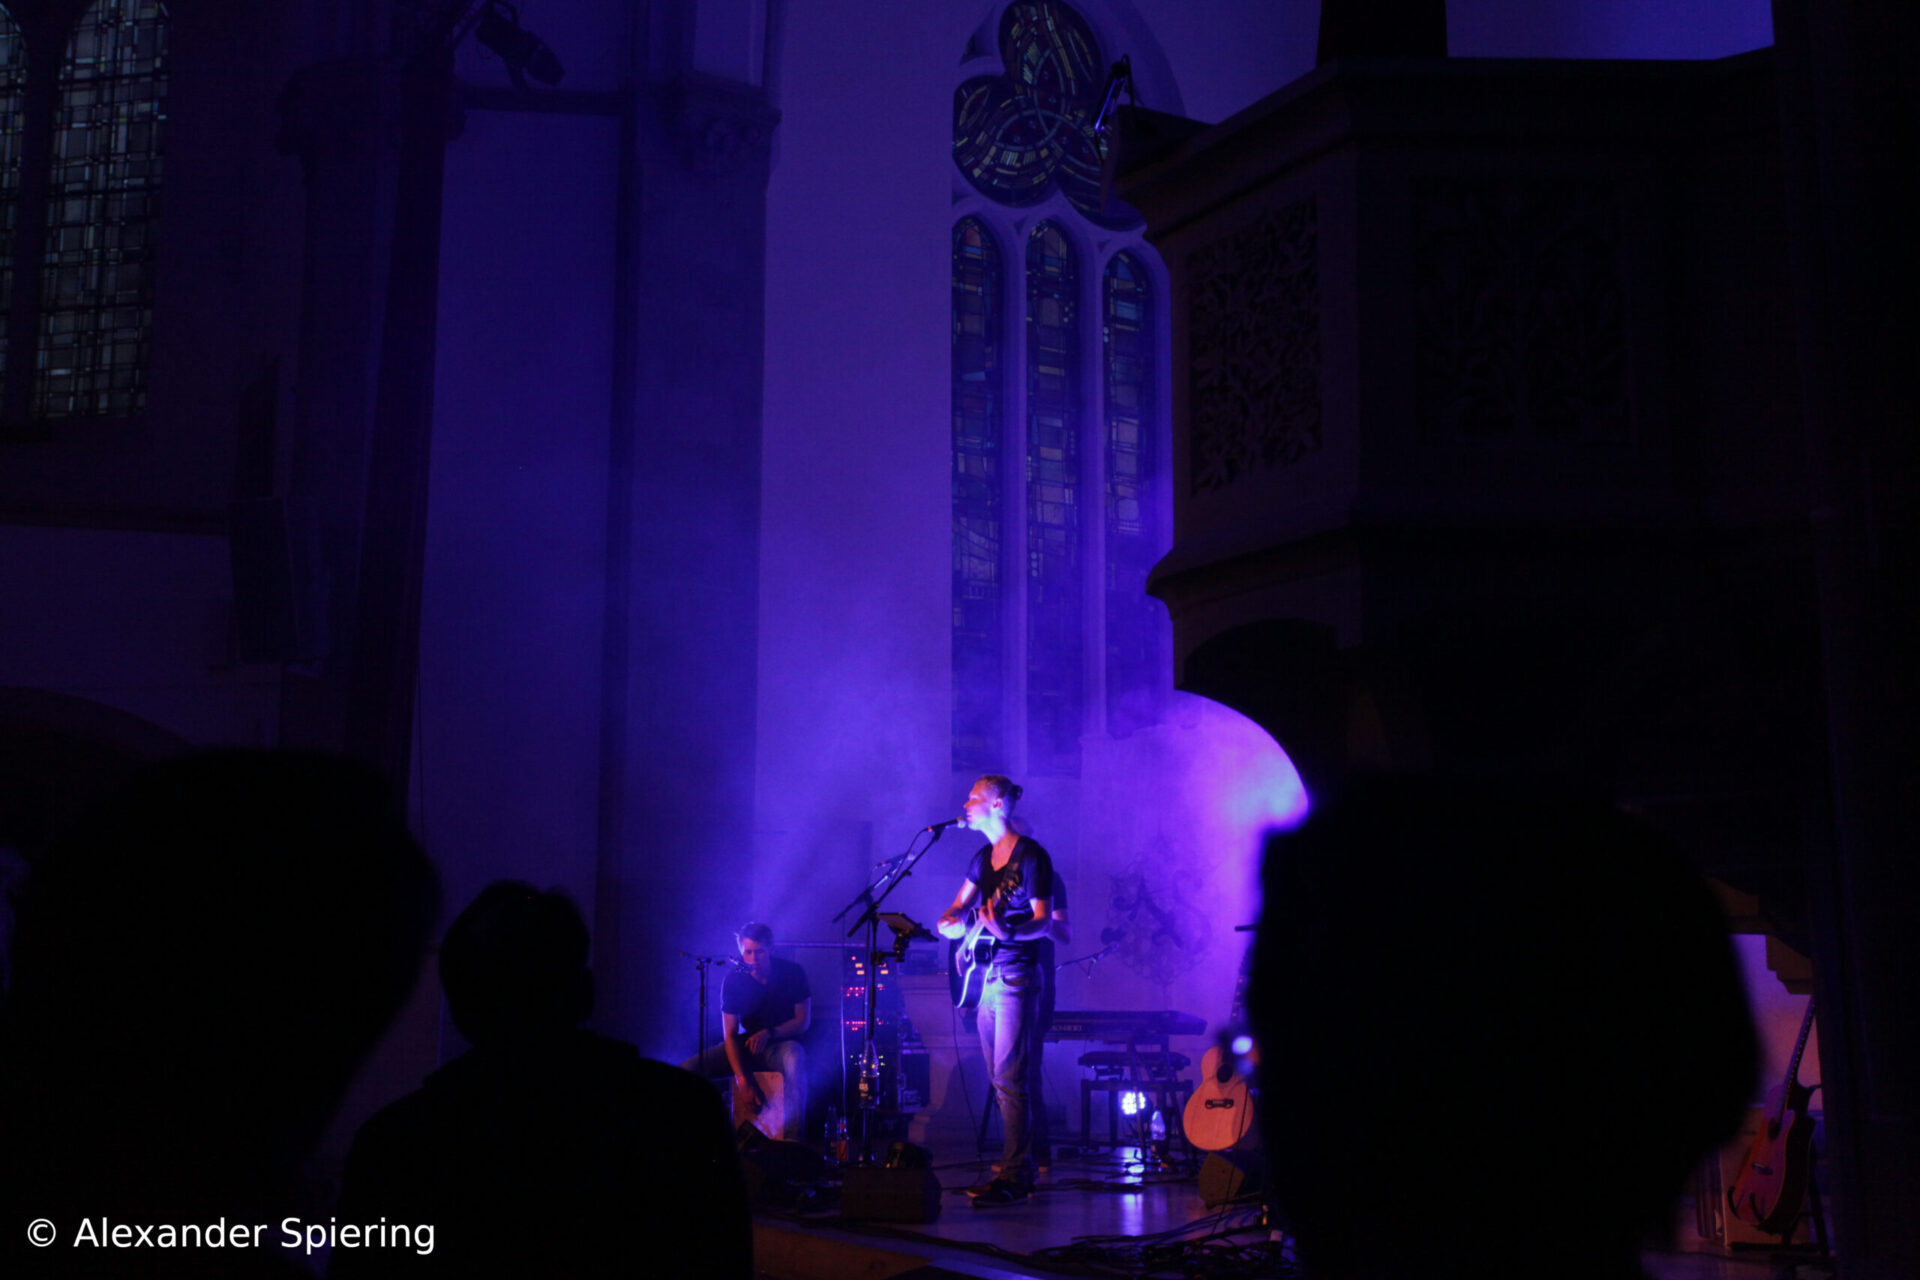 Leon live mit Quintessence Band bei Luthern! in der Lutherkirche Hannover 2018.